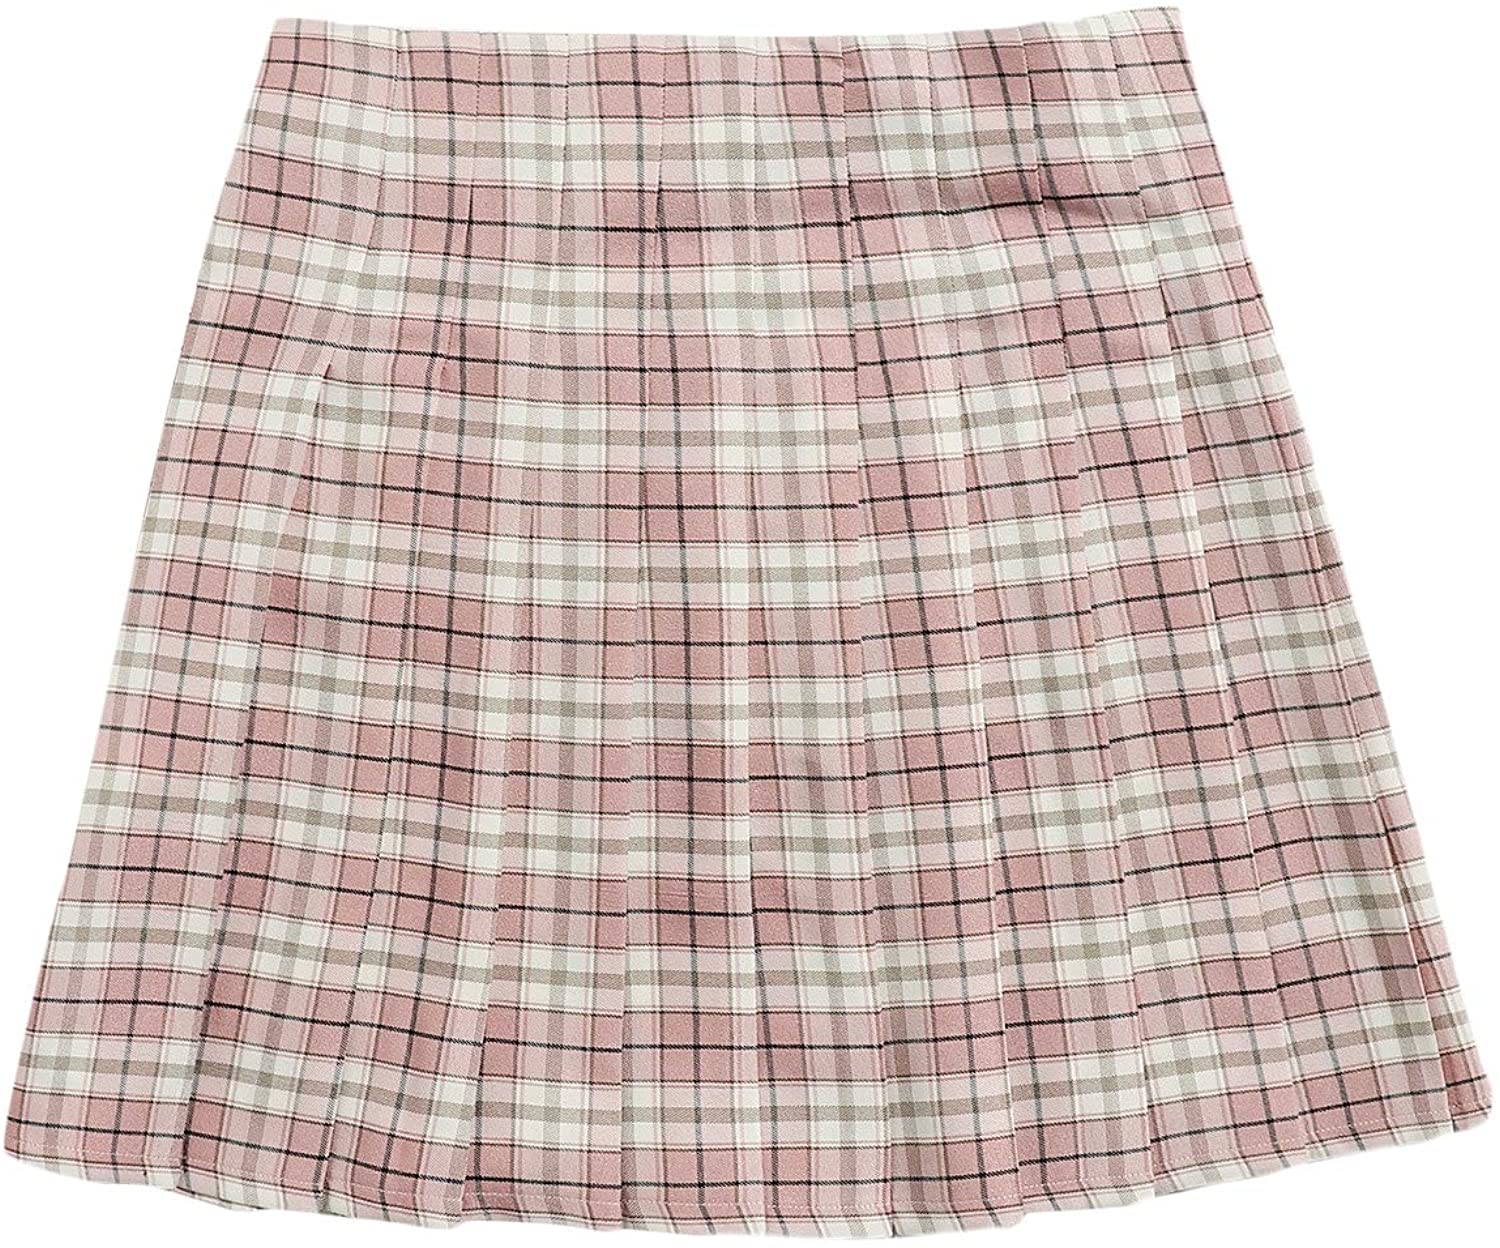 Floerns Women's Plaid High Waist Pleated Mini Skater Skirt Pink and White